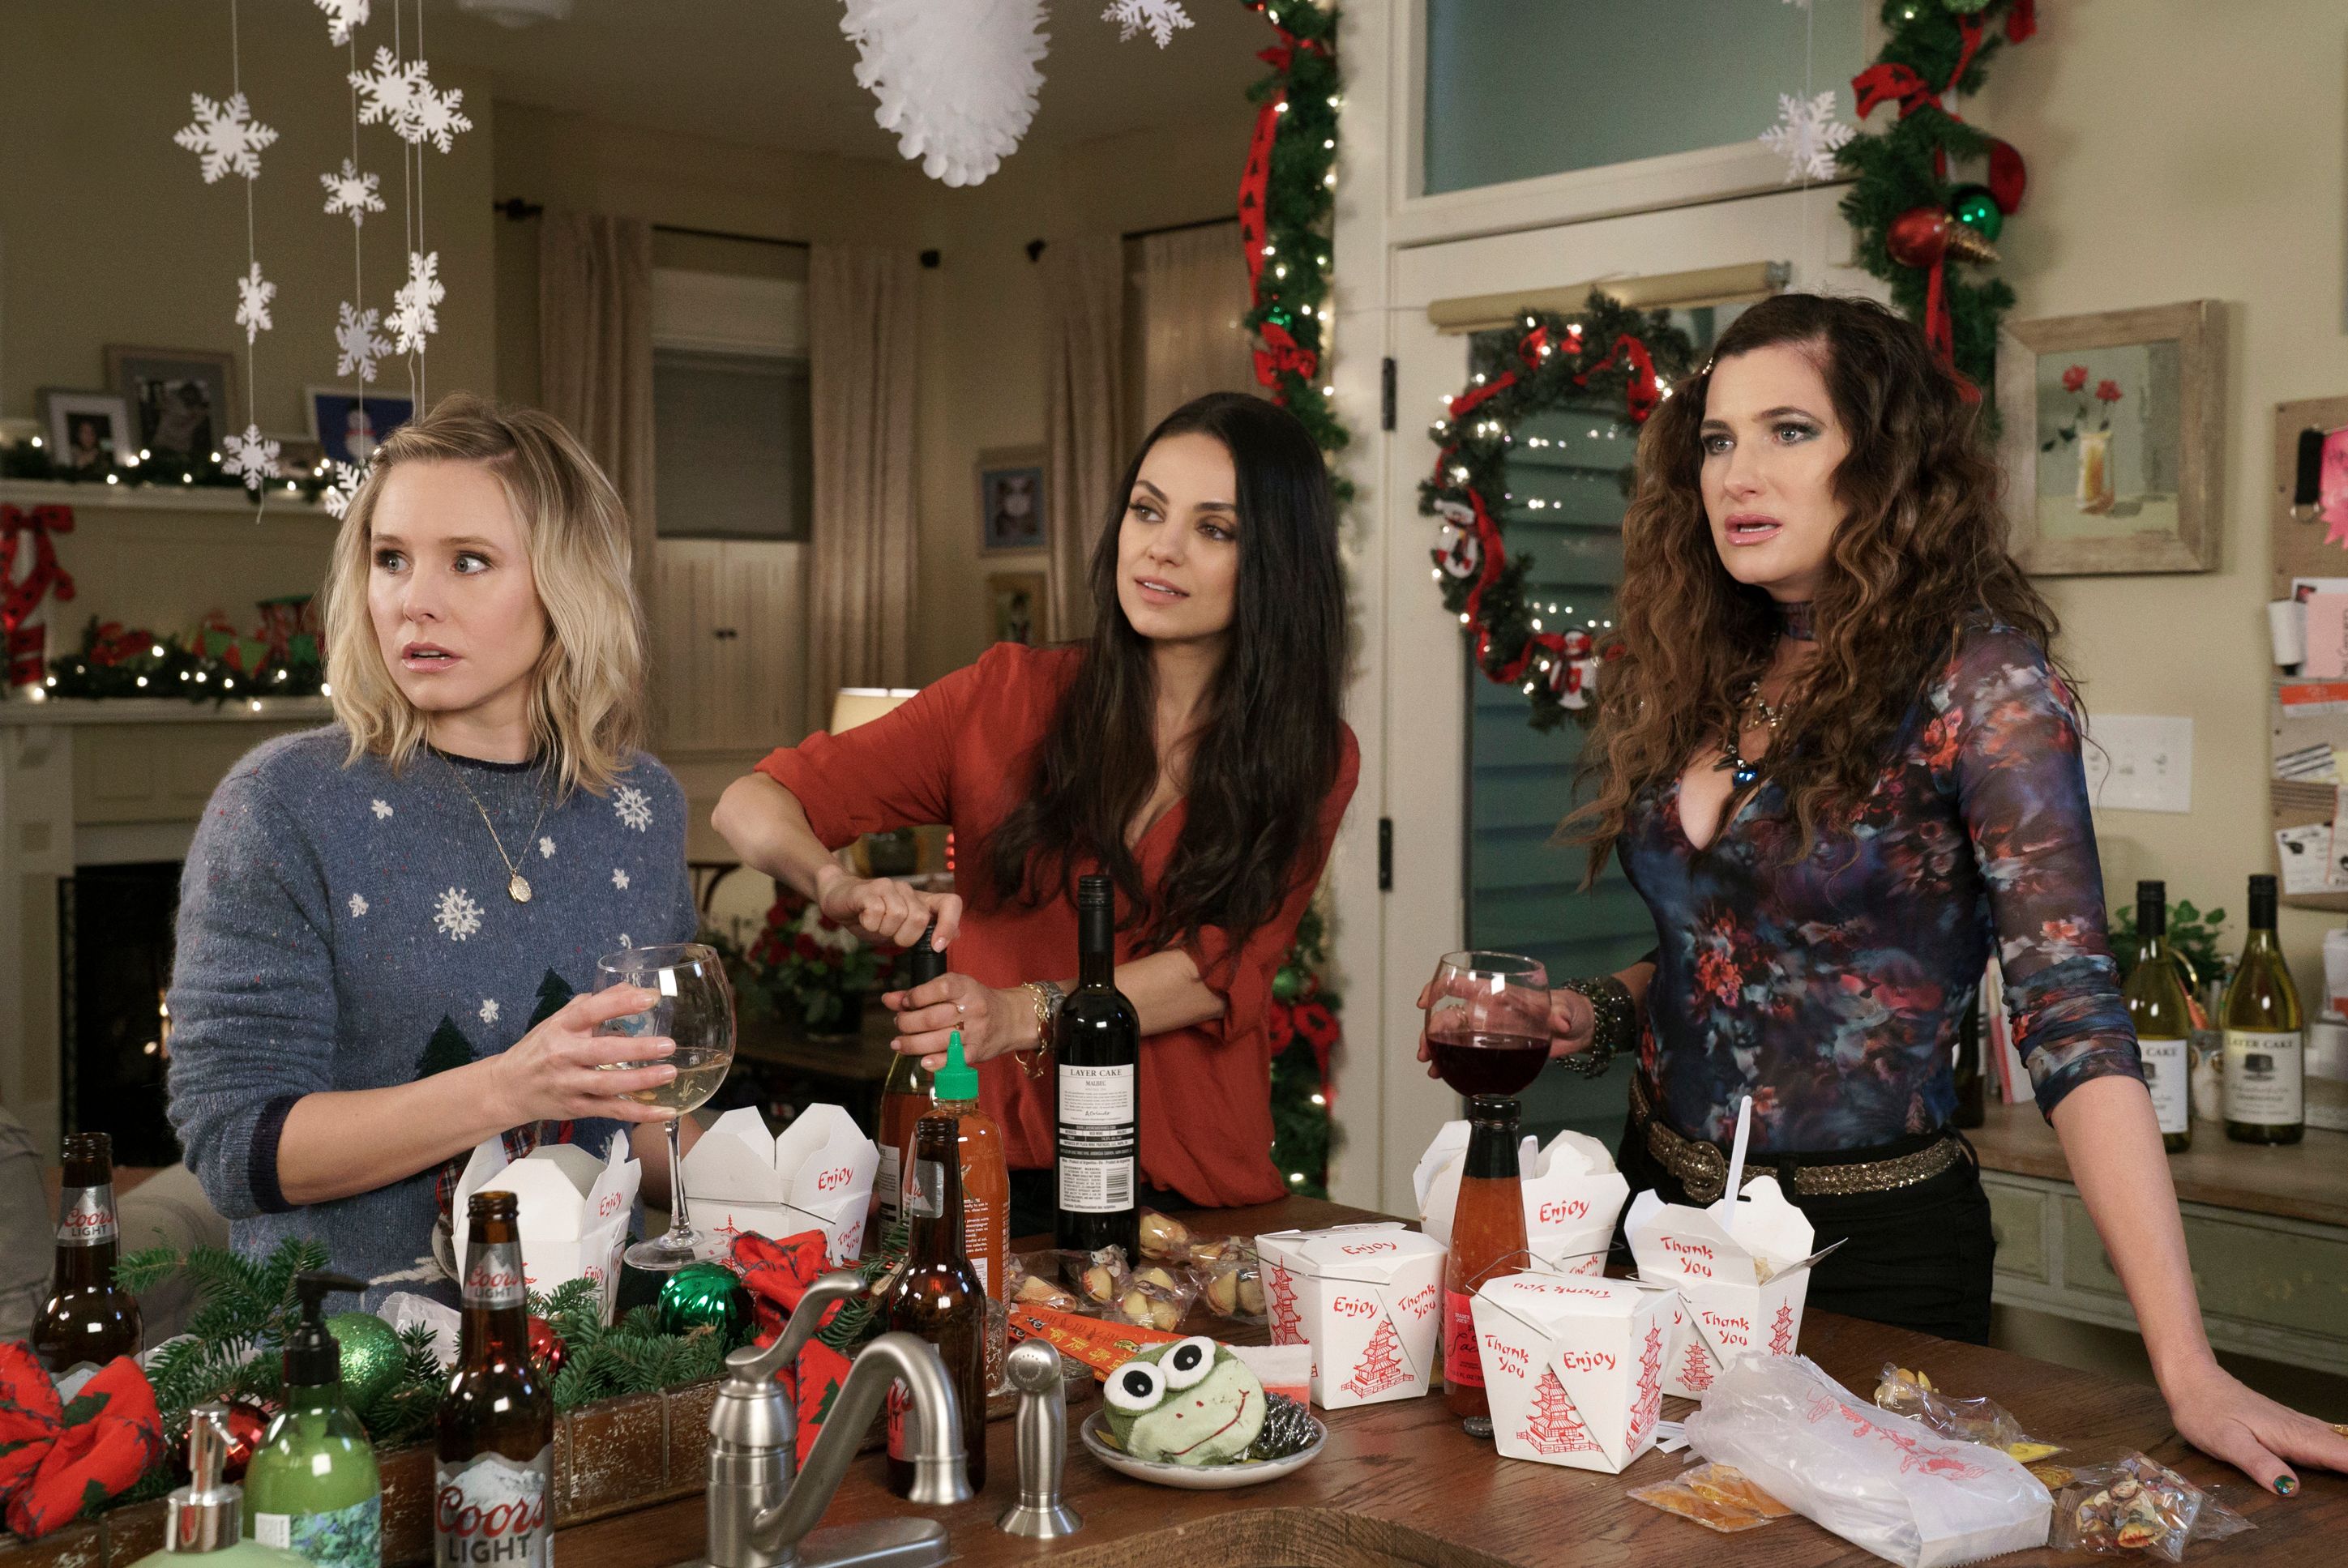 Review for the new holiday comedy sequel A BAD MOMS CHRISTMAS, opening in theatres November 1st, 2017. | Review for the new holiday comedy sequel A BAD MOMS CHRISTMAS, opening in theatres November 1st, 2017.